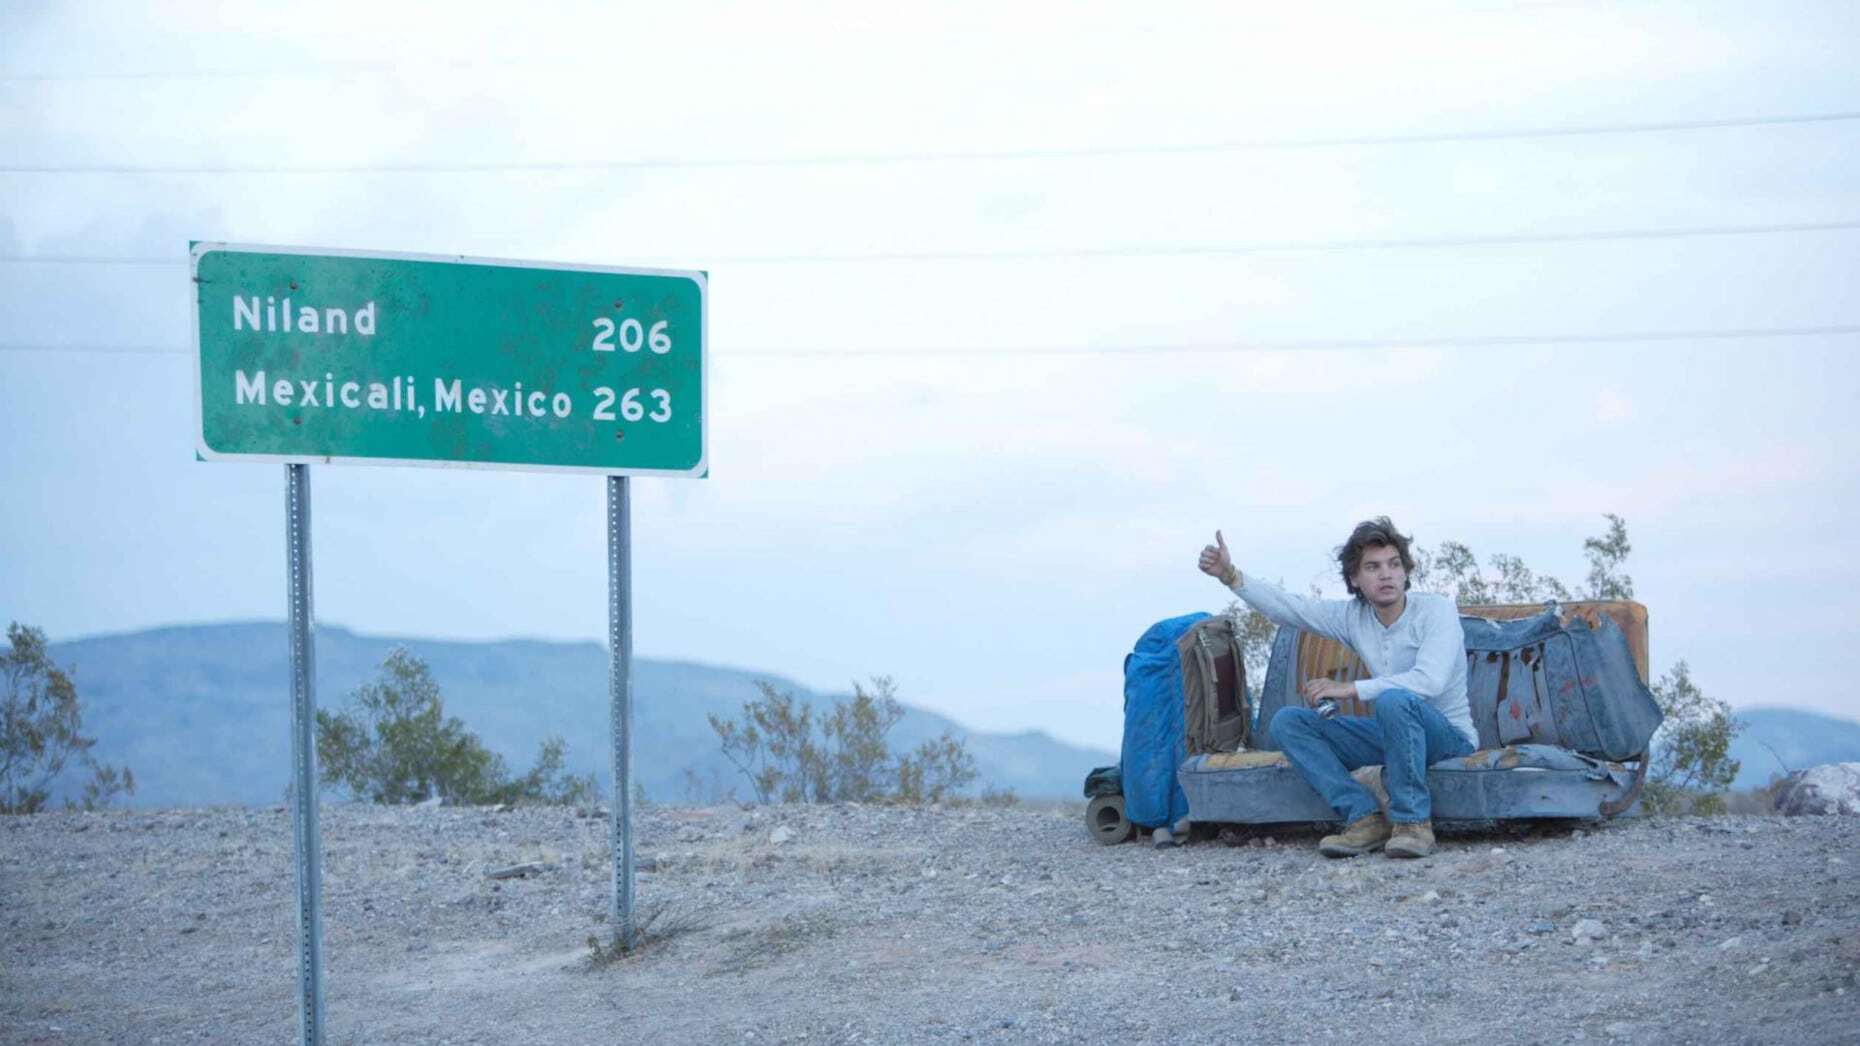 <p>Who hasn’t found themselves disenchanted with society and debated giving away all their possessions to hitchhike across the country and live in the wilderness? Fortunately, that’s exactly the journey that <a href="https://www.imdb.com/title/tt0758758/"><em>Into the Wild</em></a> portrays, telling the biographical story of <a href="https://www.britannica.com/biography/Christopher-McCandless">Christopher McCandless</a>, who met all sorts of people on his journey out to live in the Alaskan wild.</p>